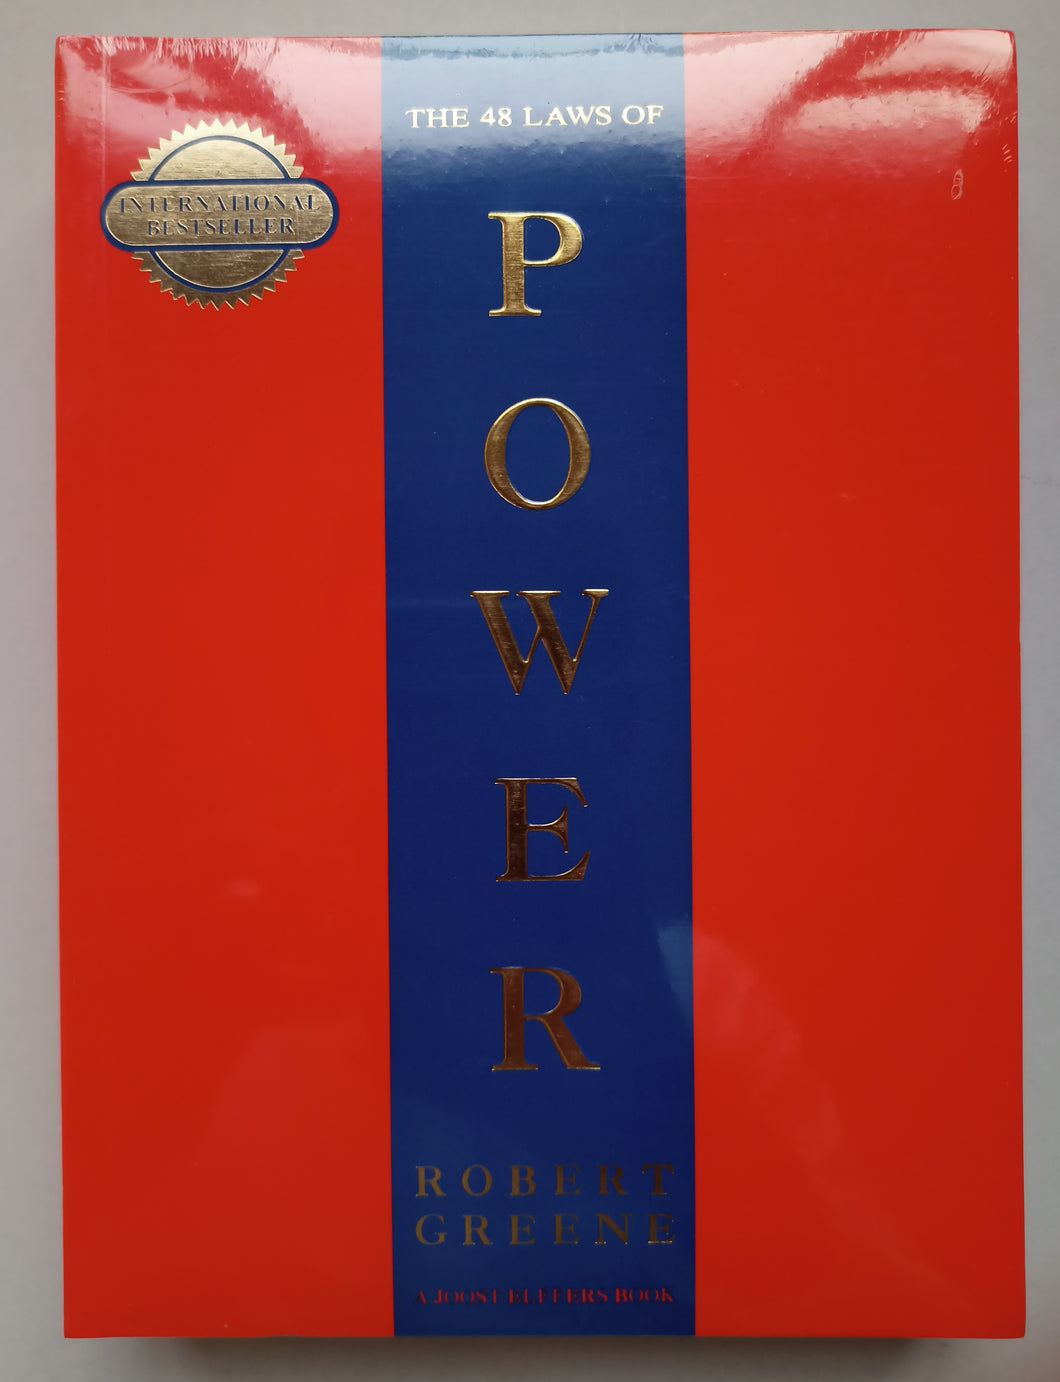 The 48 Laws of Power with Robert Greene